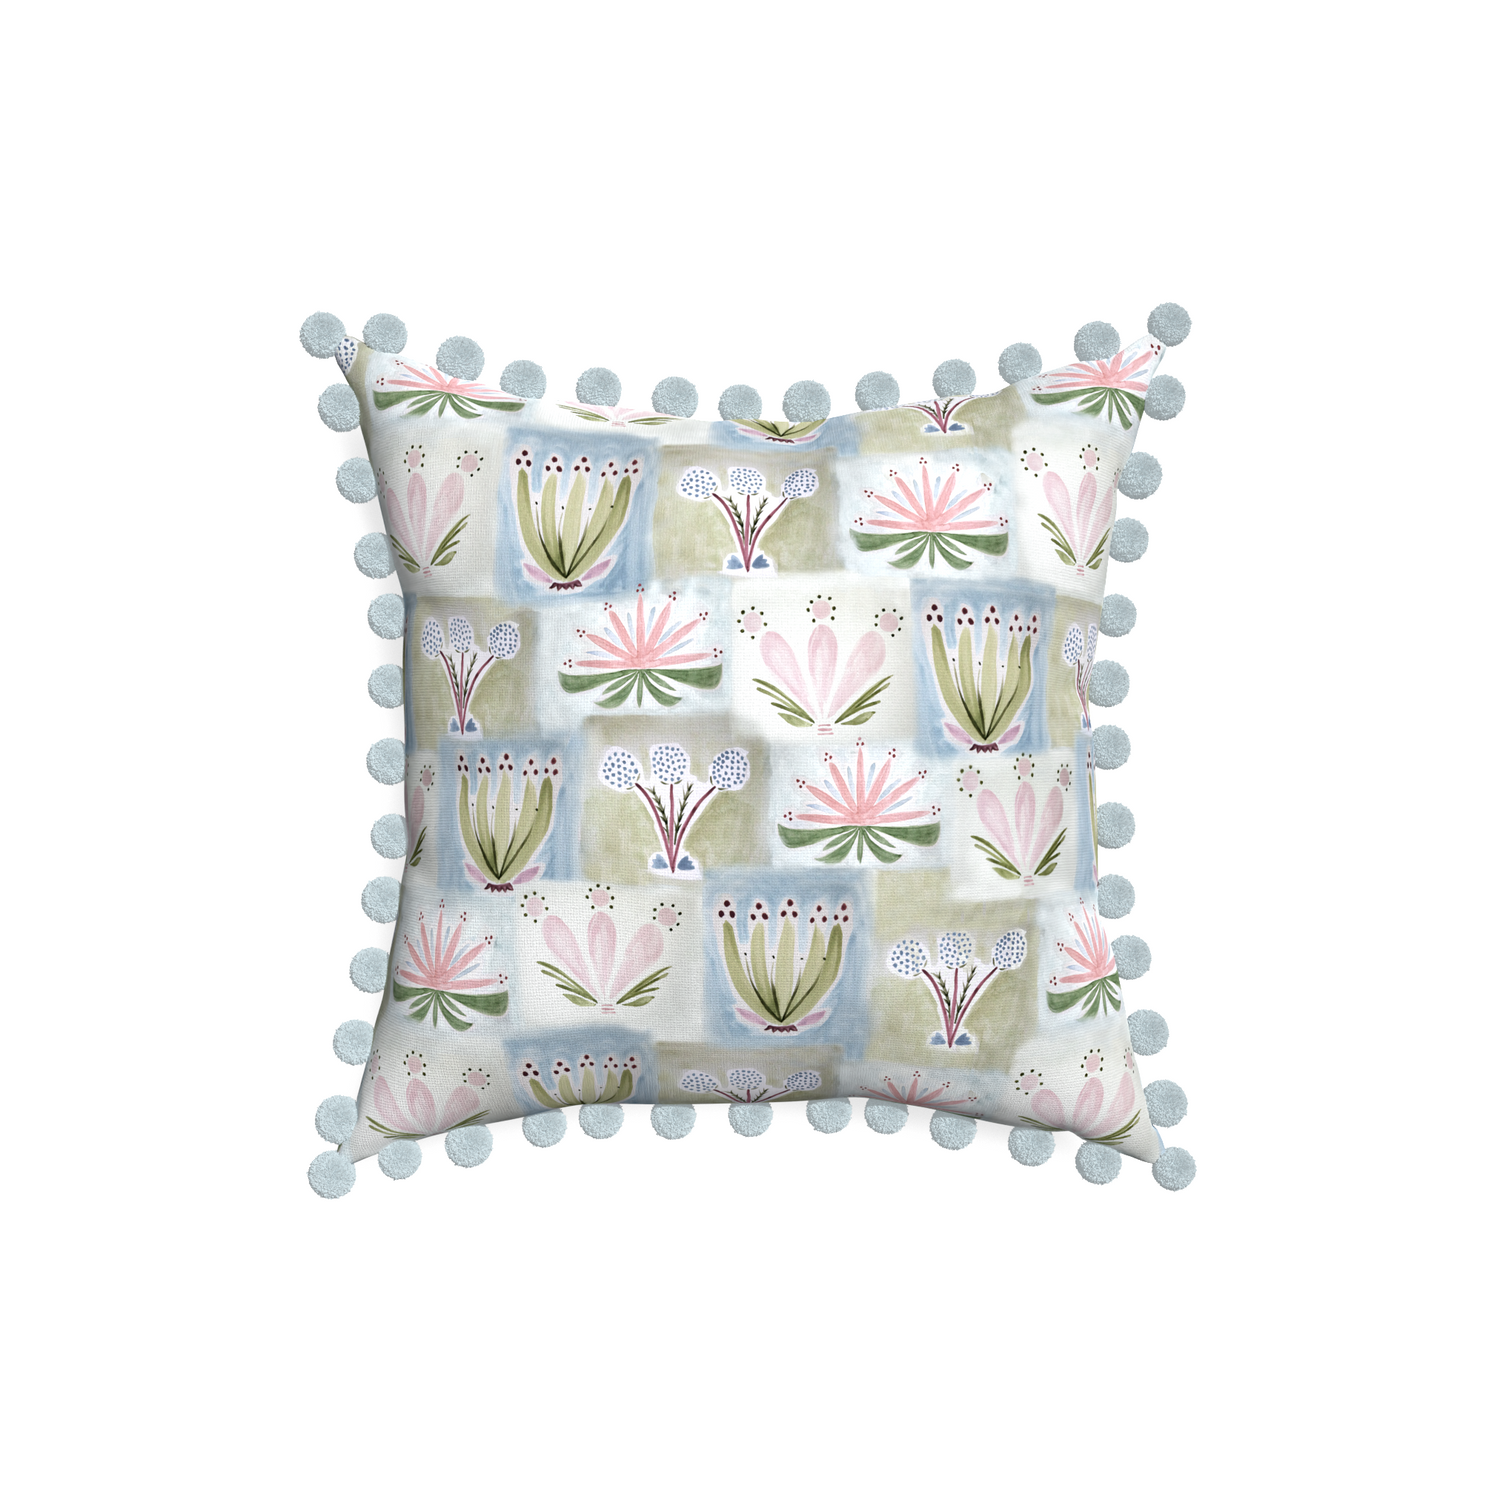 18-square harper custom hand-painted floralpillow with powder pom pom on white background